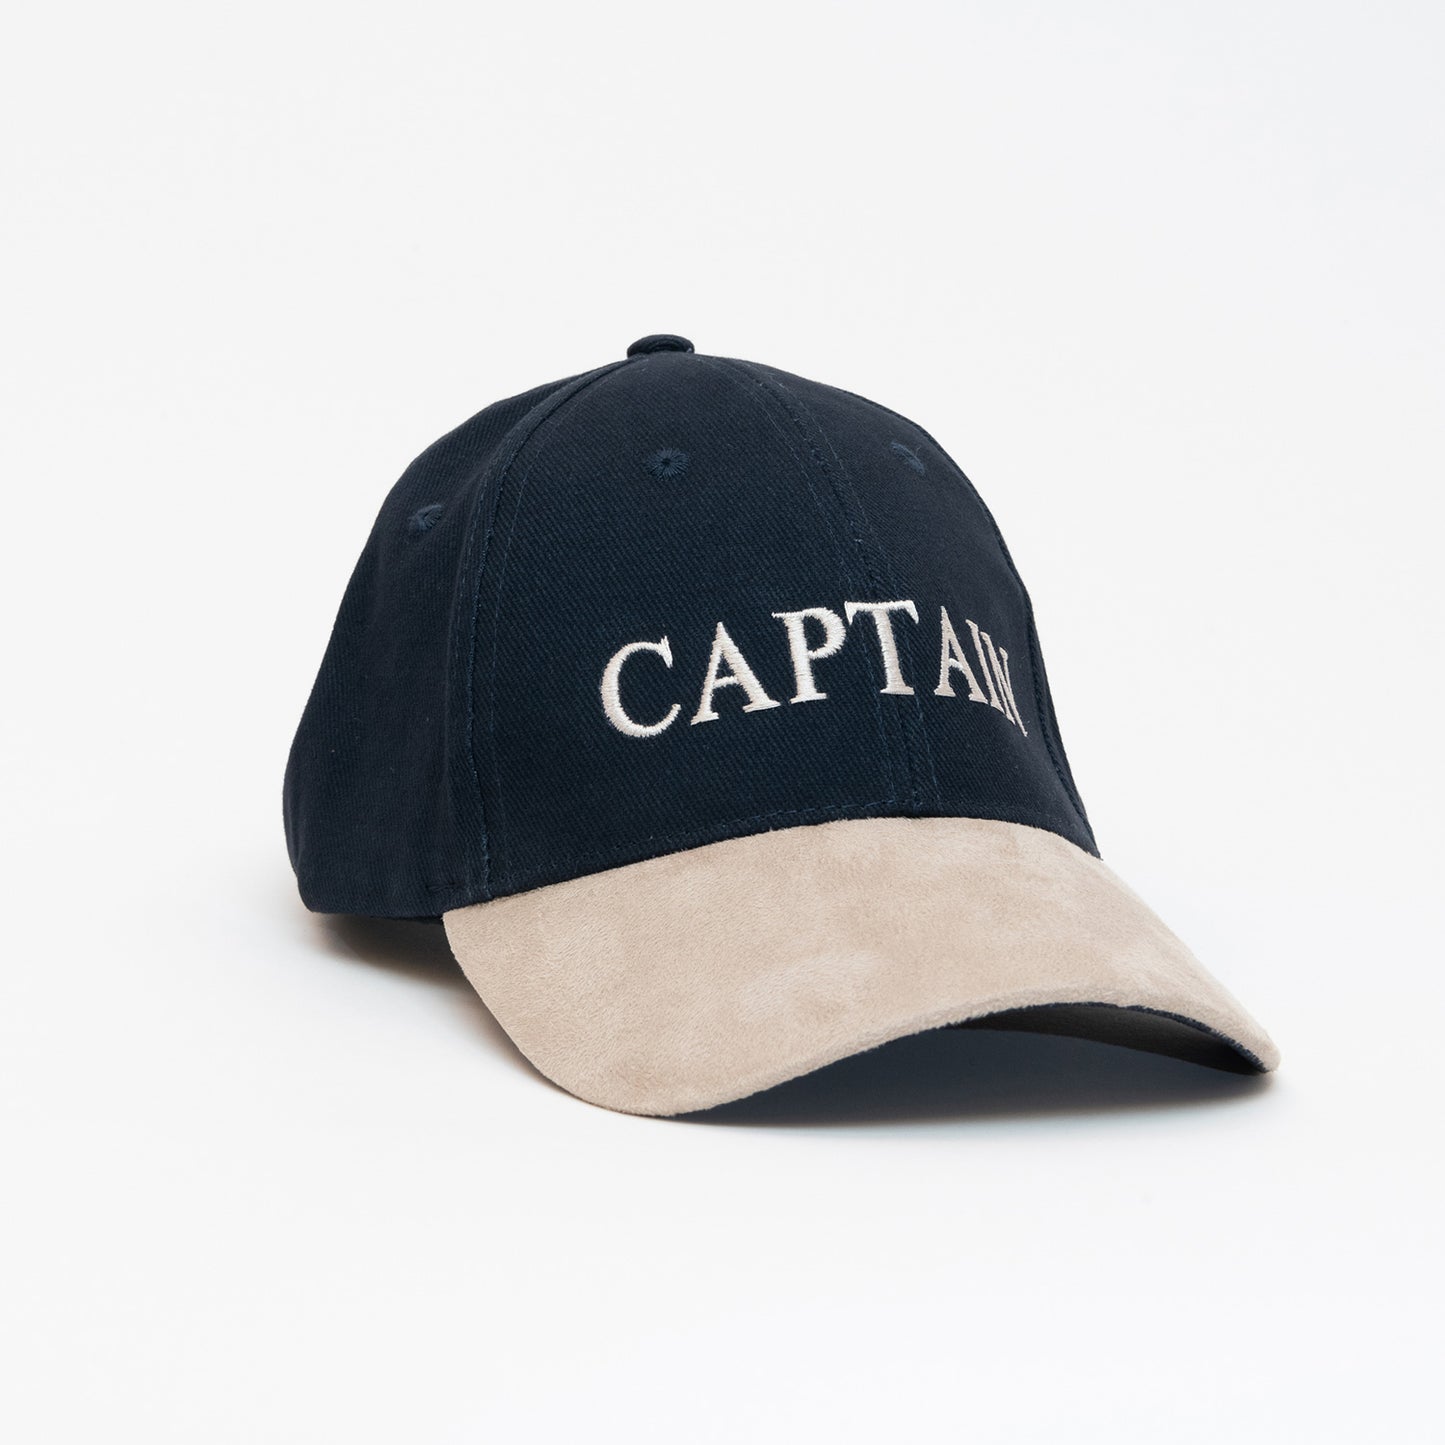 A black cap with a beige peak, with the word 'Captain' written on the front. Photographed on a white background.